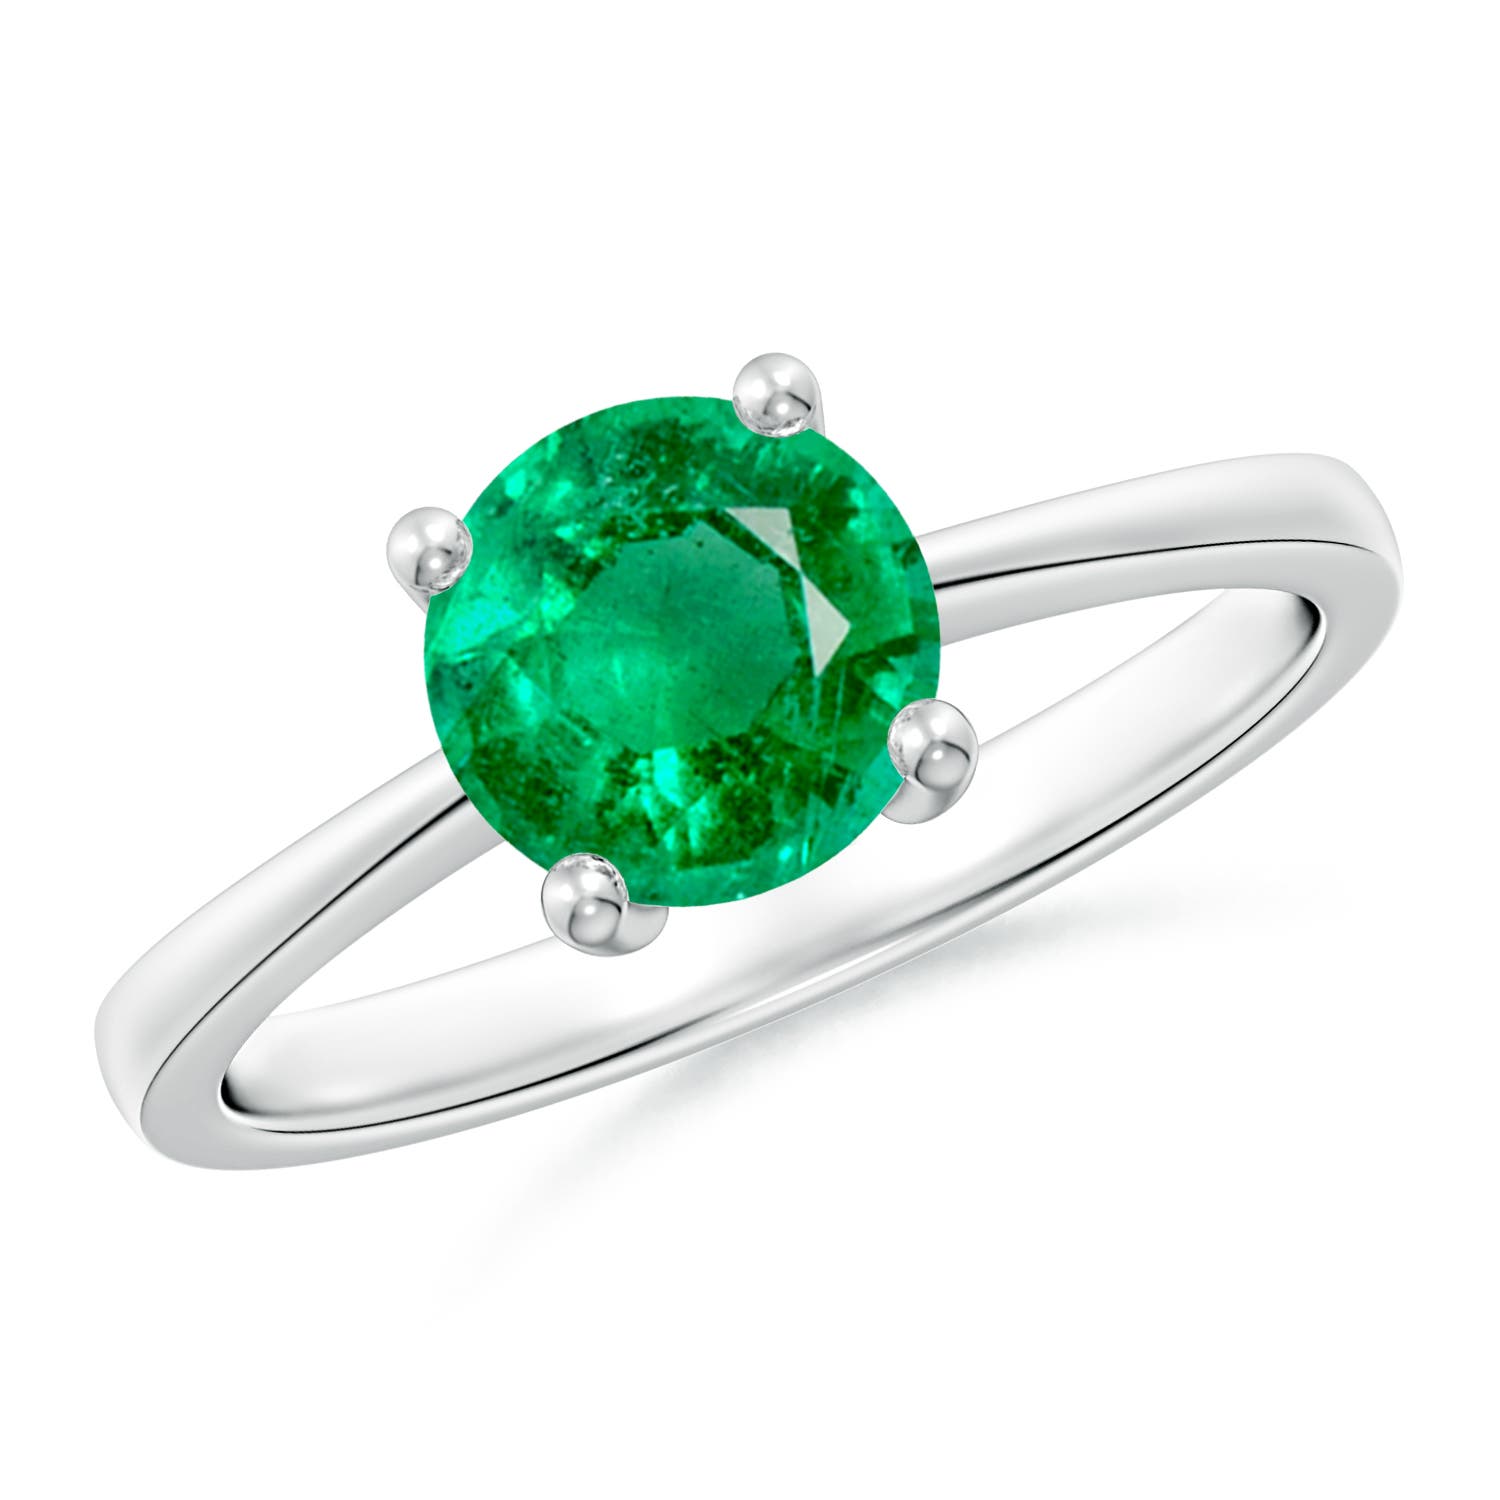 AAA - Emerald / 1.2 CT / 14 KT White Gold